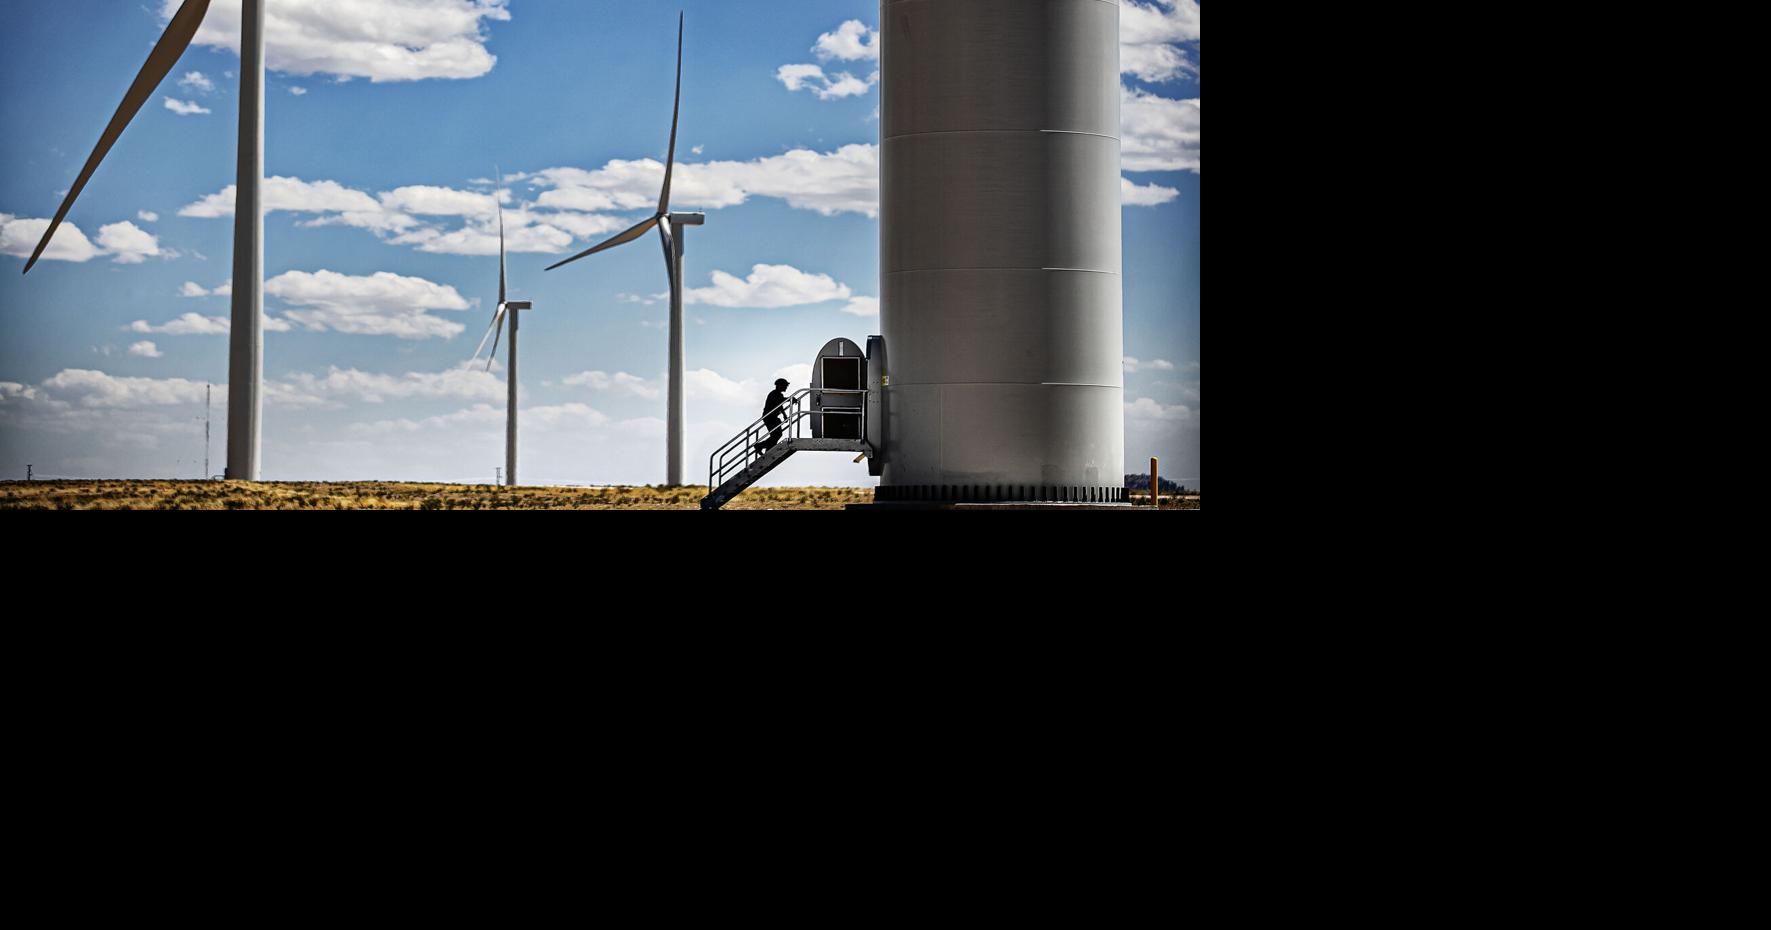 Huge wind project developing in Central New Mexico